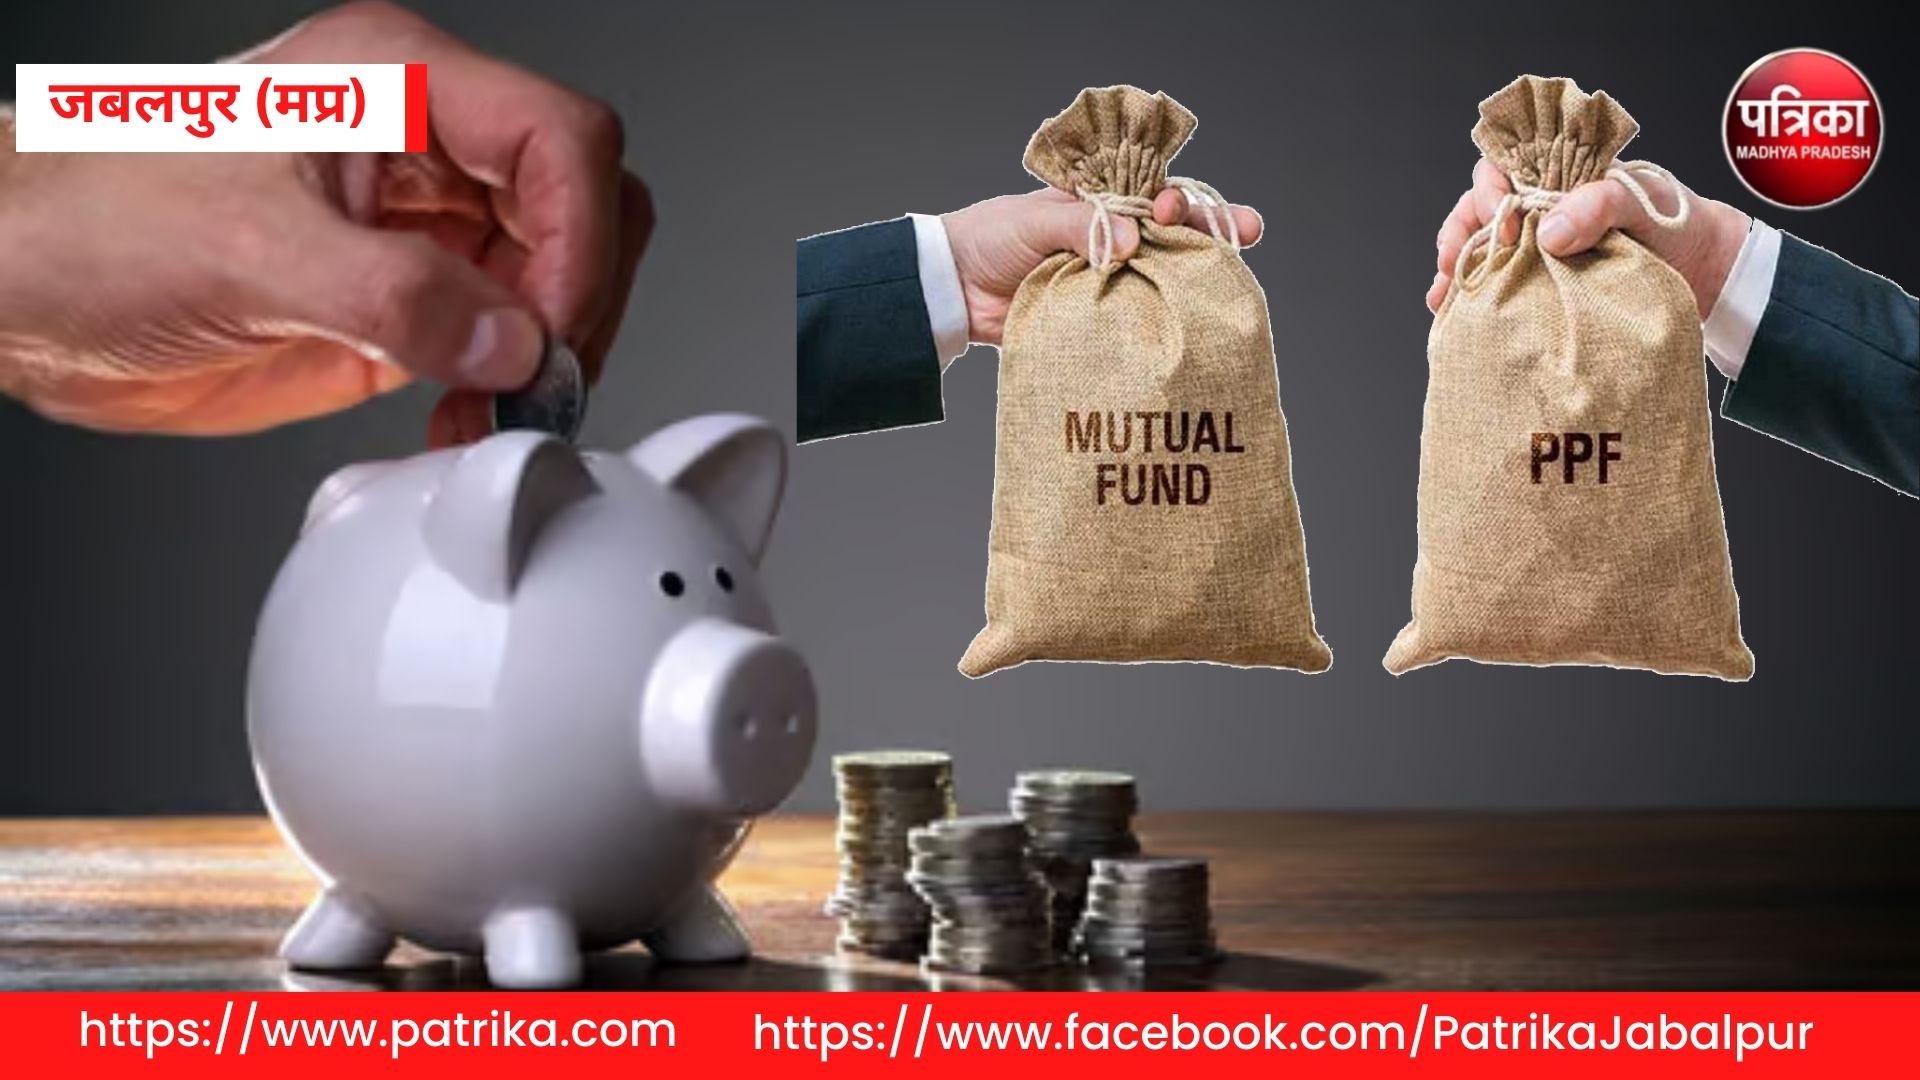 PPF and mutual funds